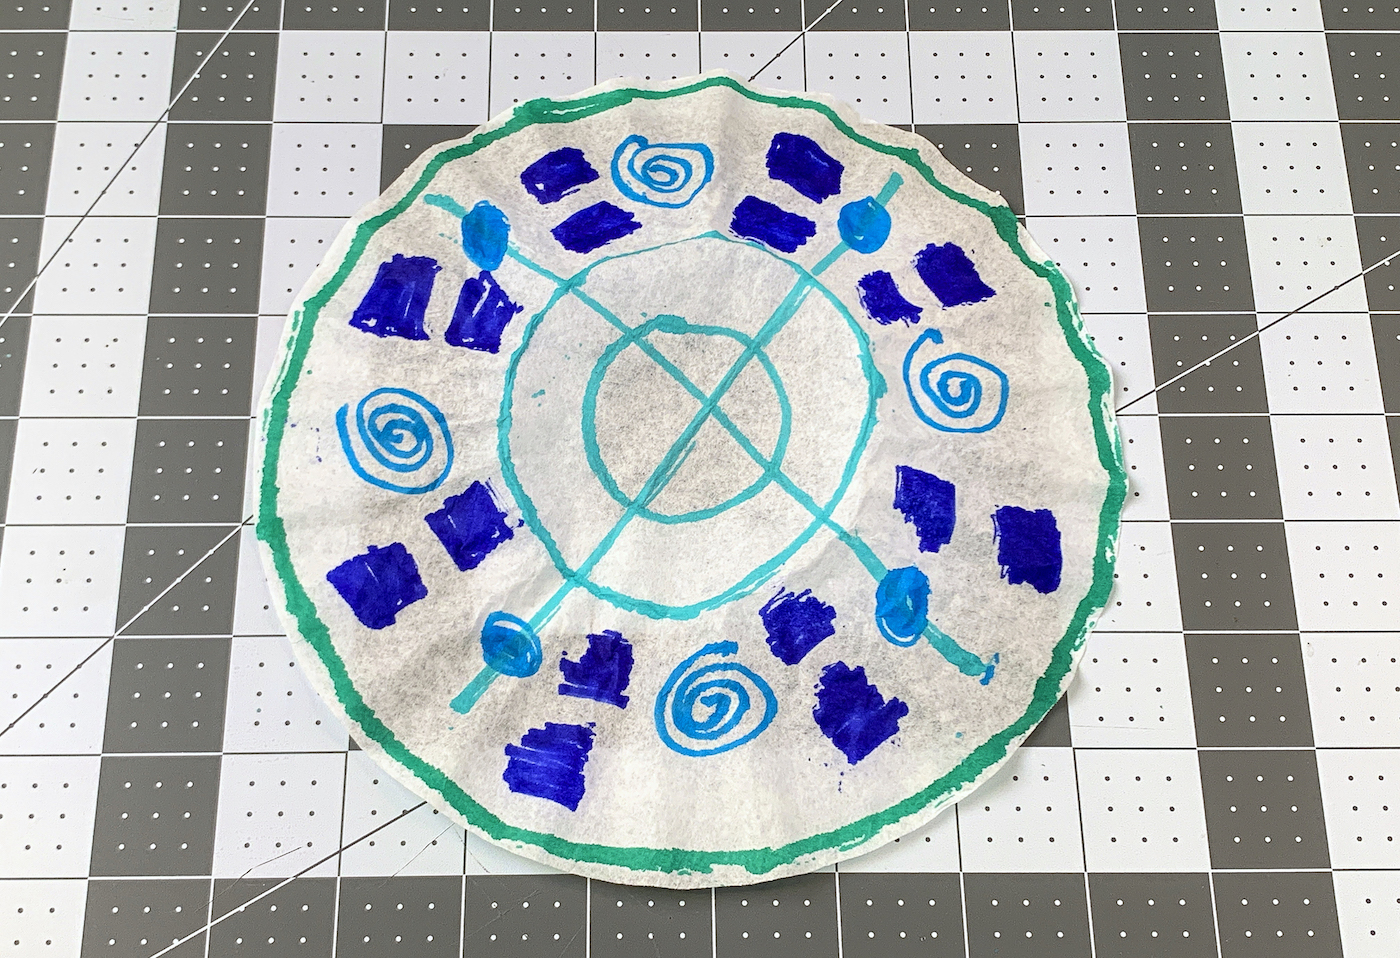 Coffee filter with marker lines drawn on it in green, blue, and aqua markers